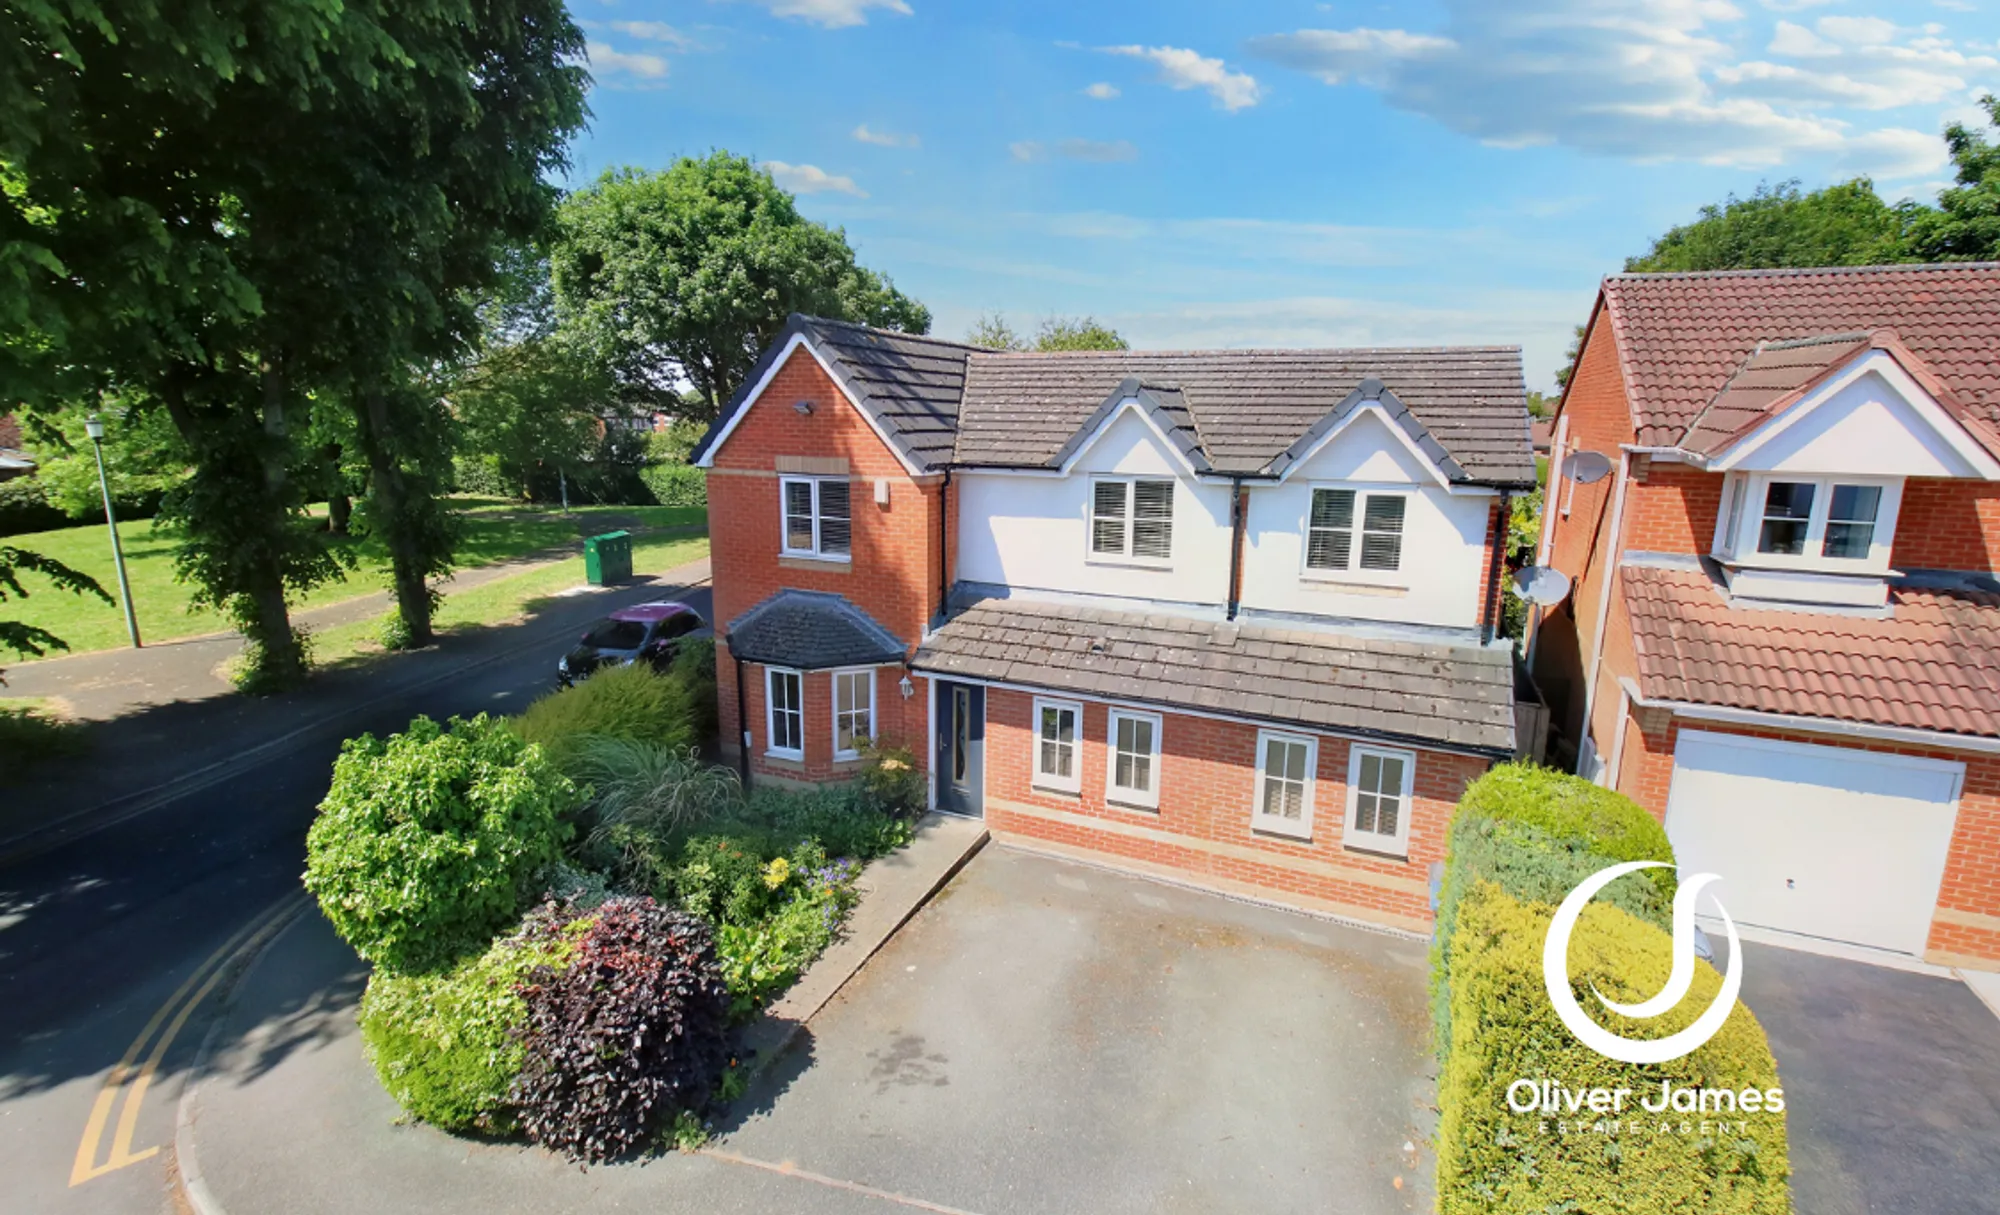 4 bed detached house for sale in Primary Close, Manchester - Property Image 1